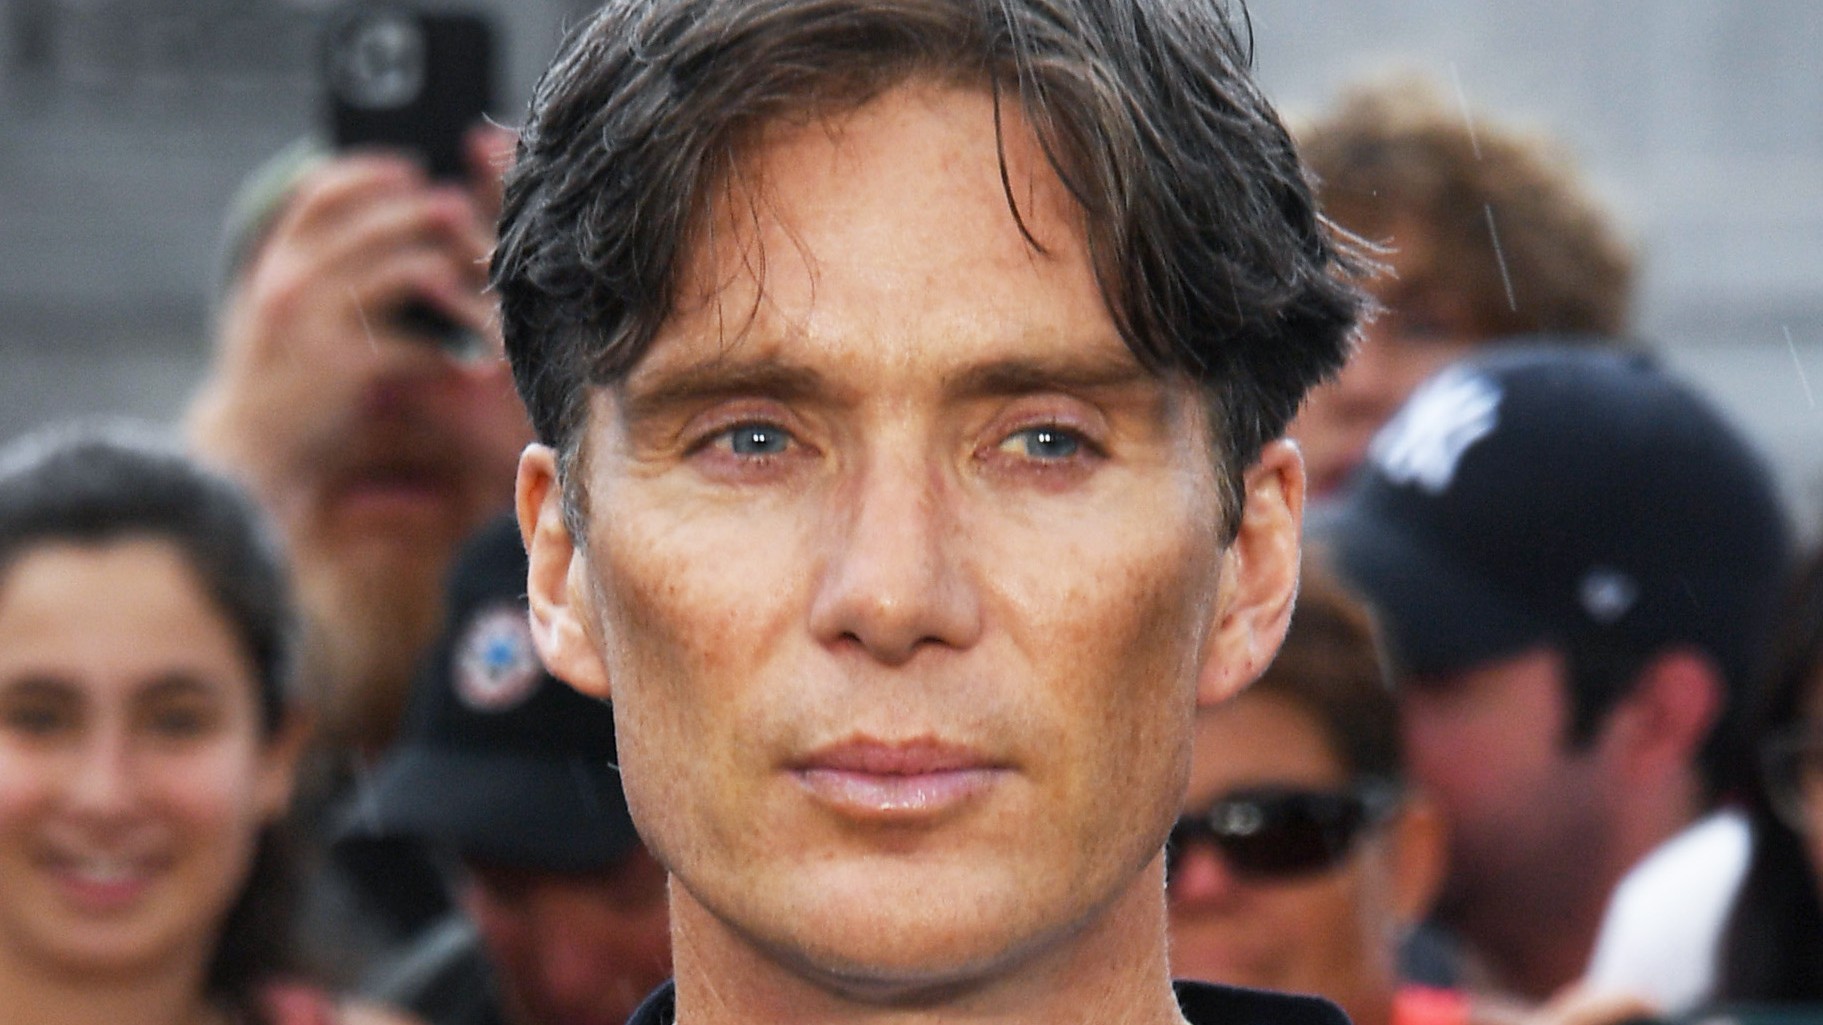 Cillian Murphy, Star of ‘Oppenheimer,’ Says He’s Down to Play a Ken if ...